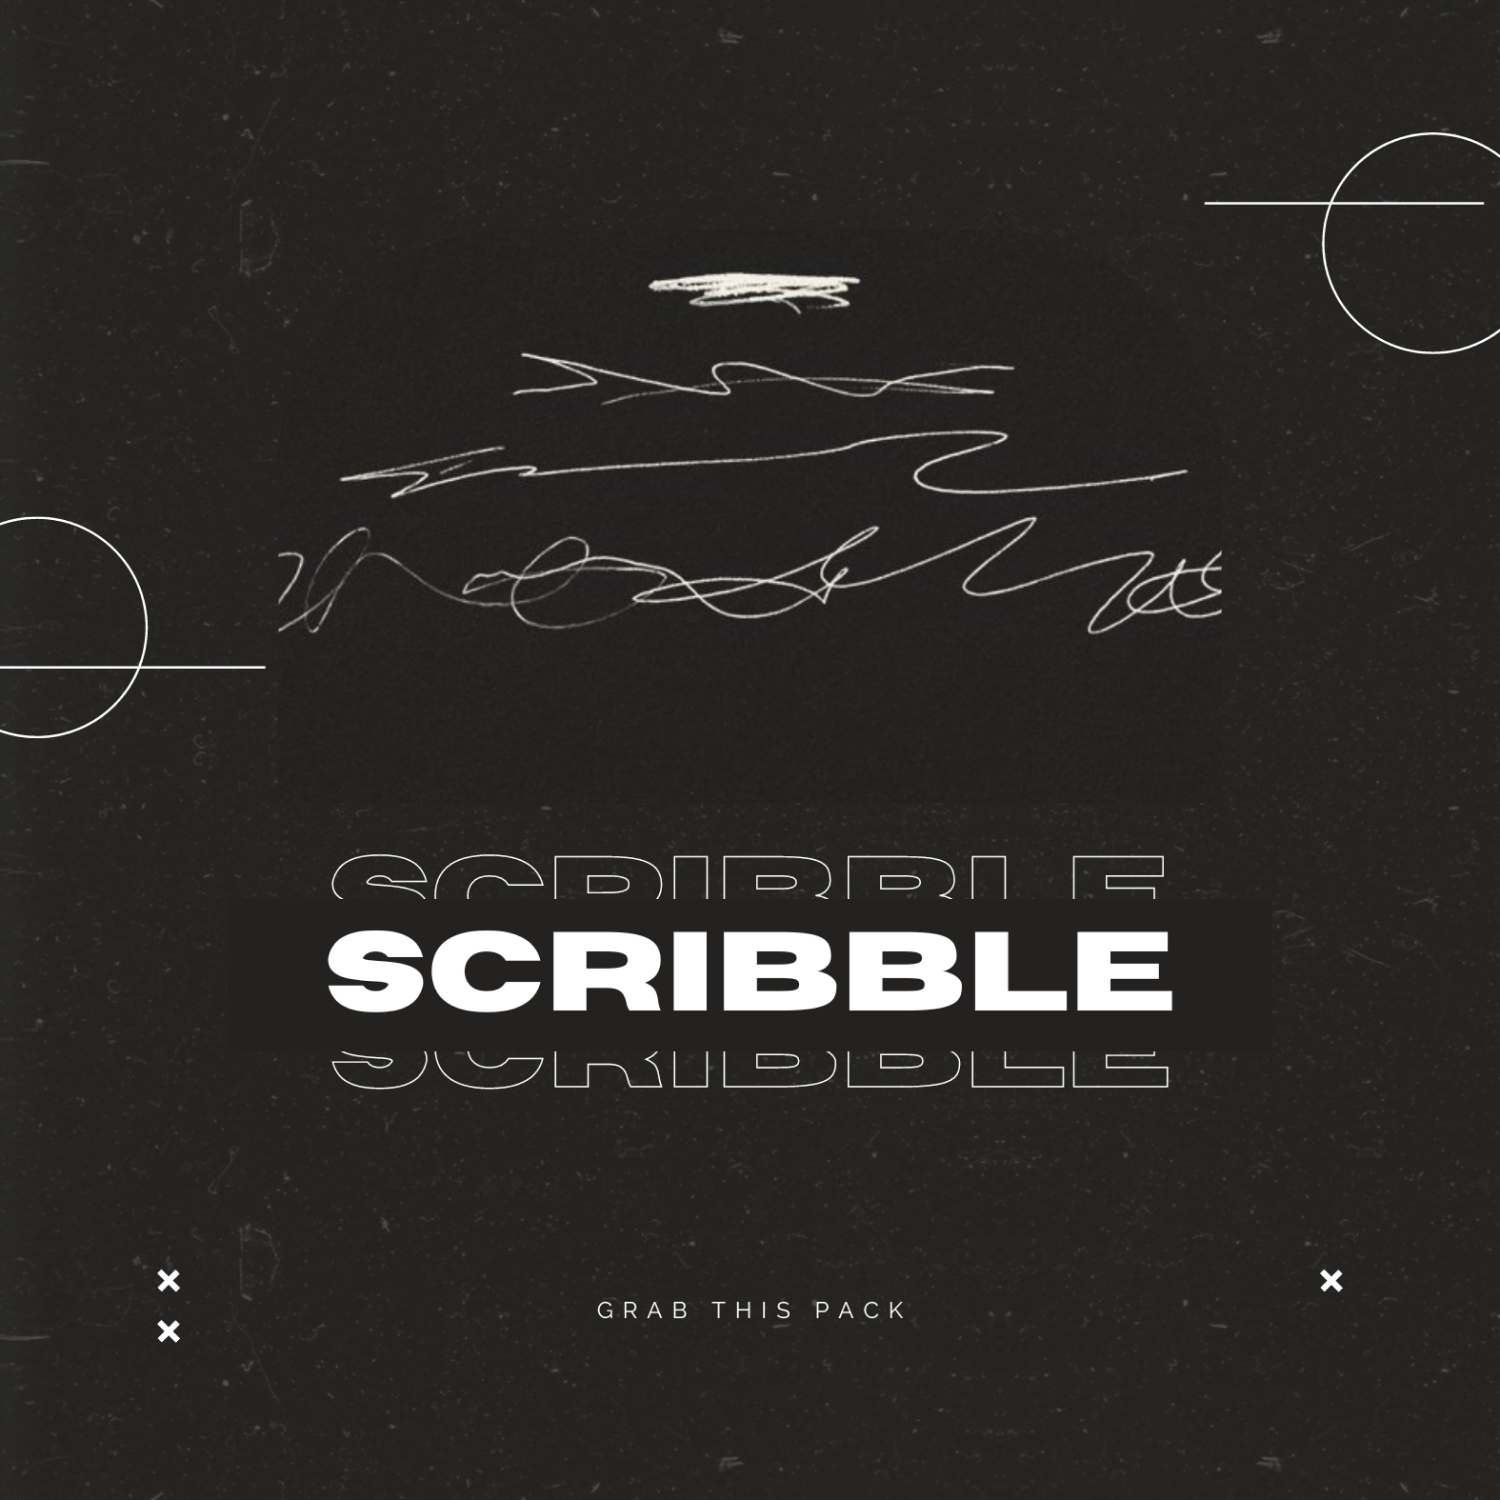 Scribble - 500+ Lines, Shapes + More.